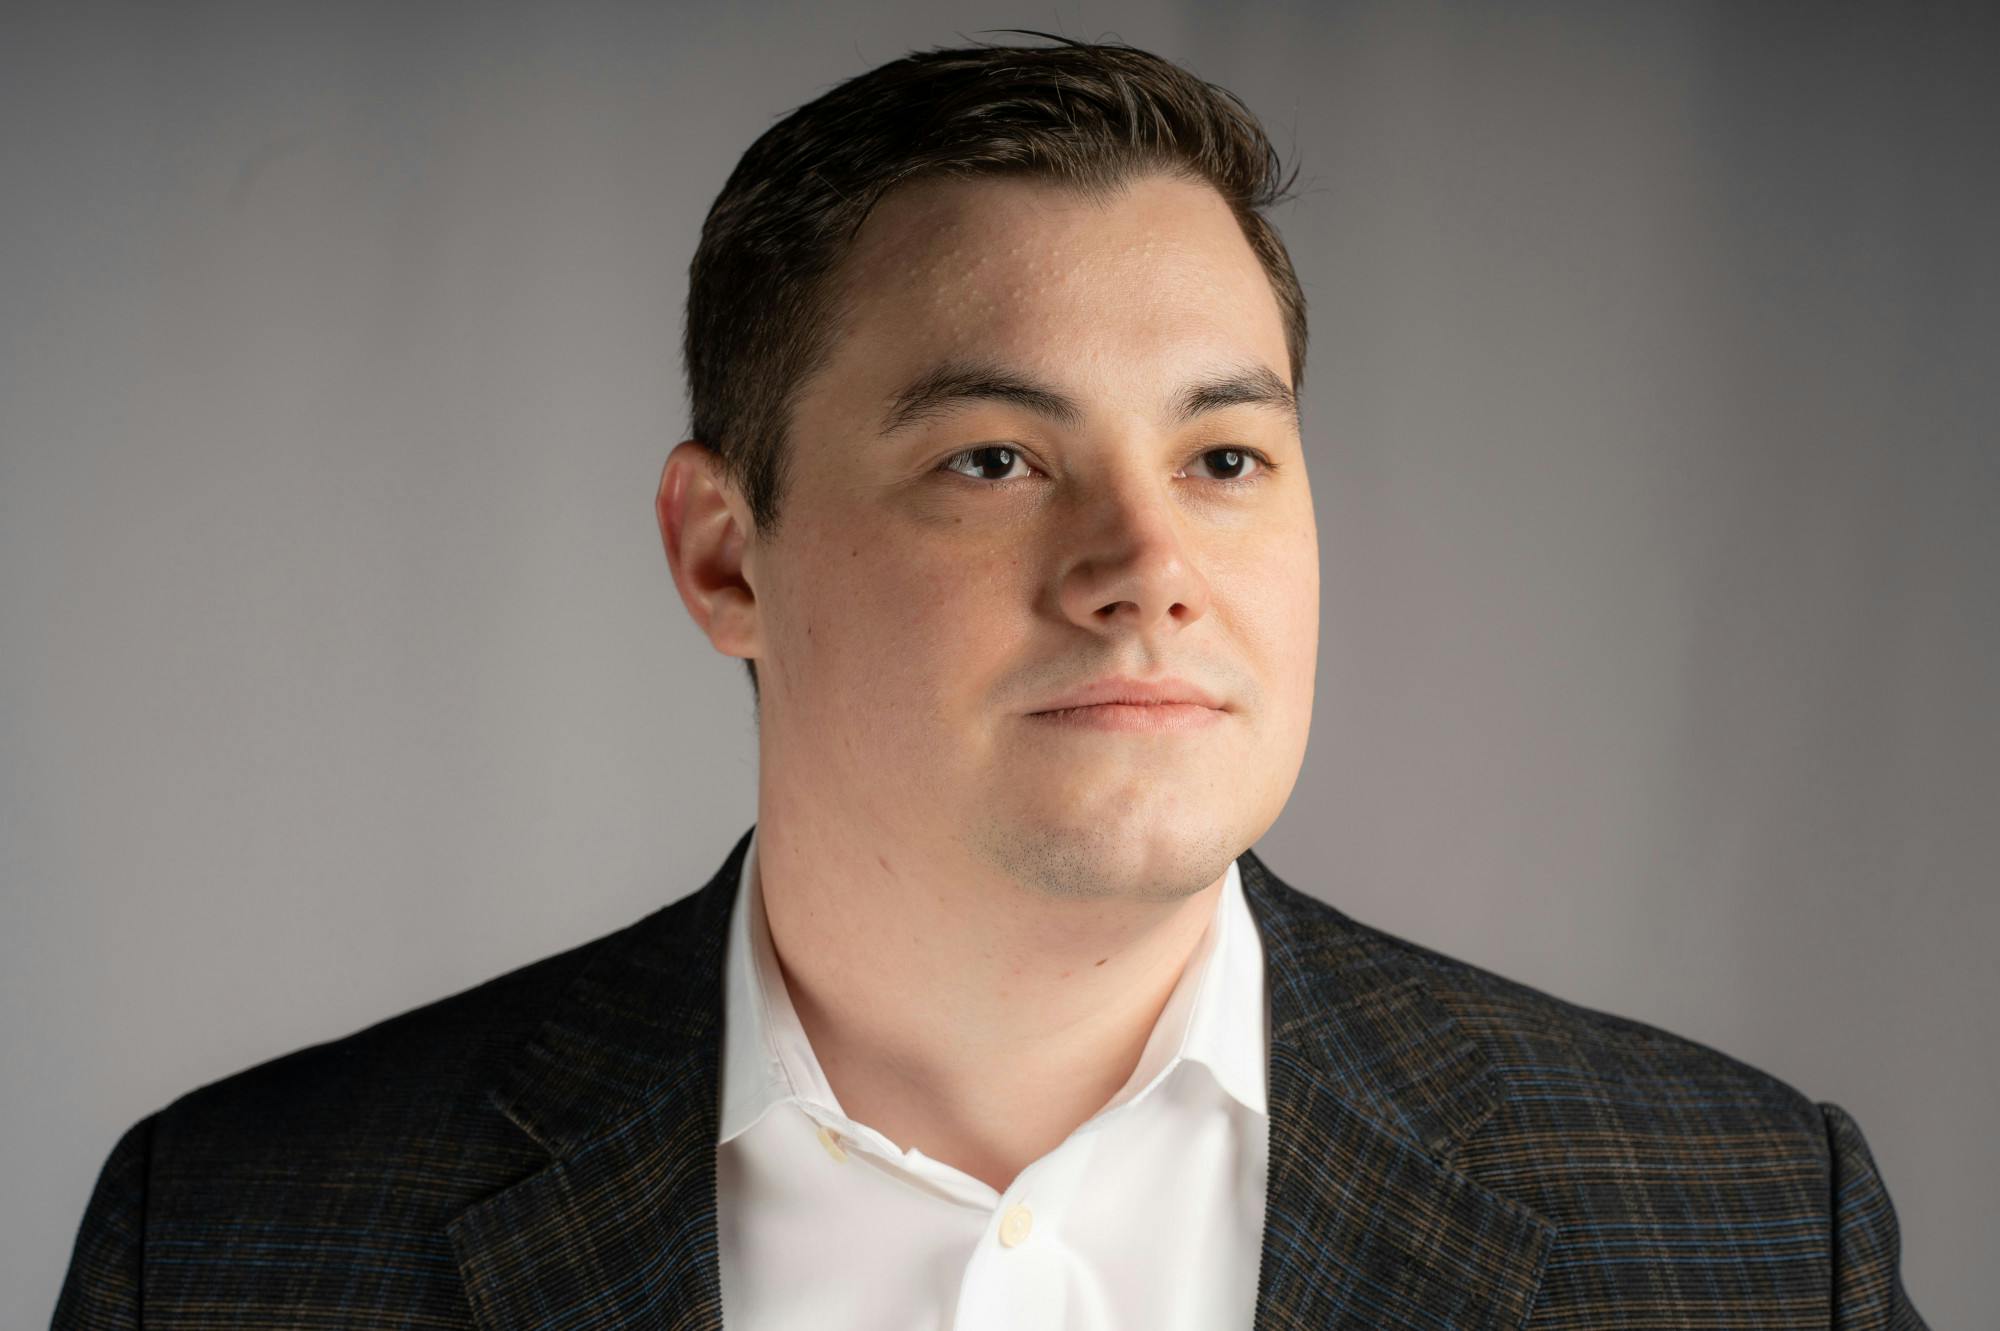 <p>Logan Byrne, Michigan State University graduate and candidate for the 77th House District seat, poses for a portrait on Jan. 25. <br/><br/></p>